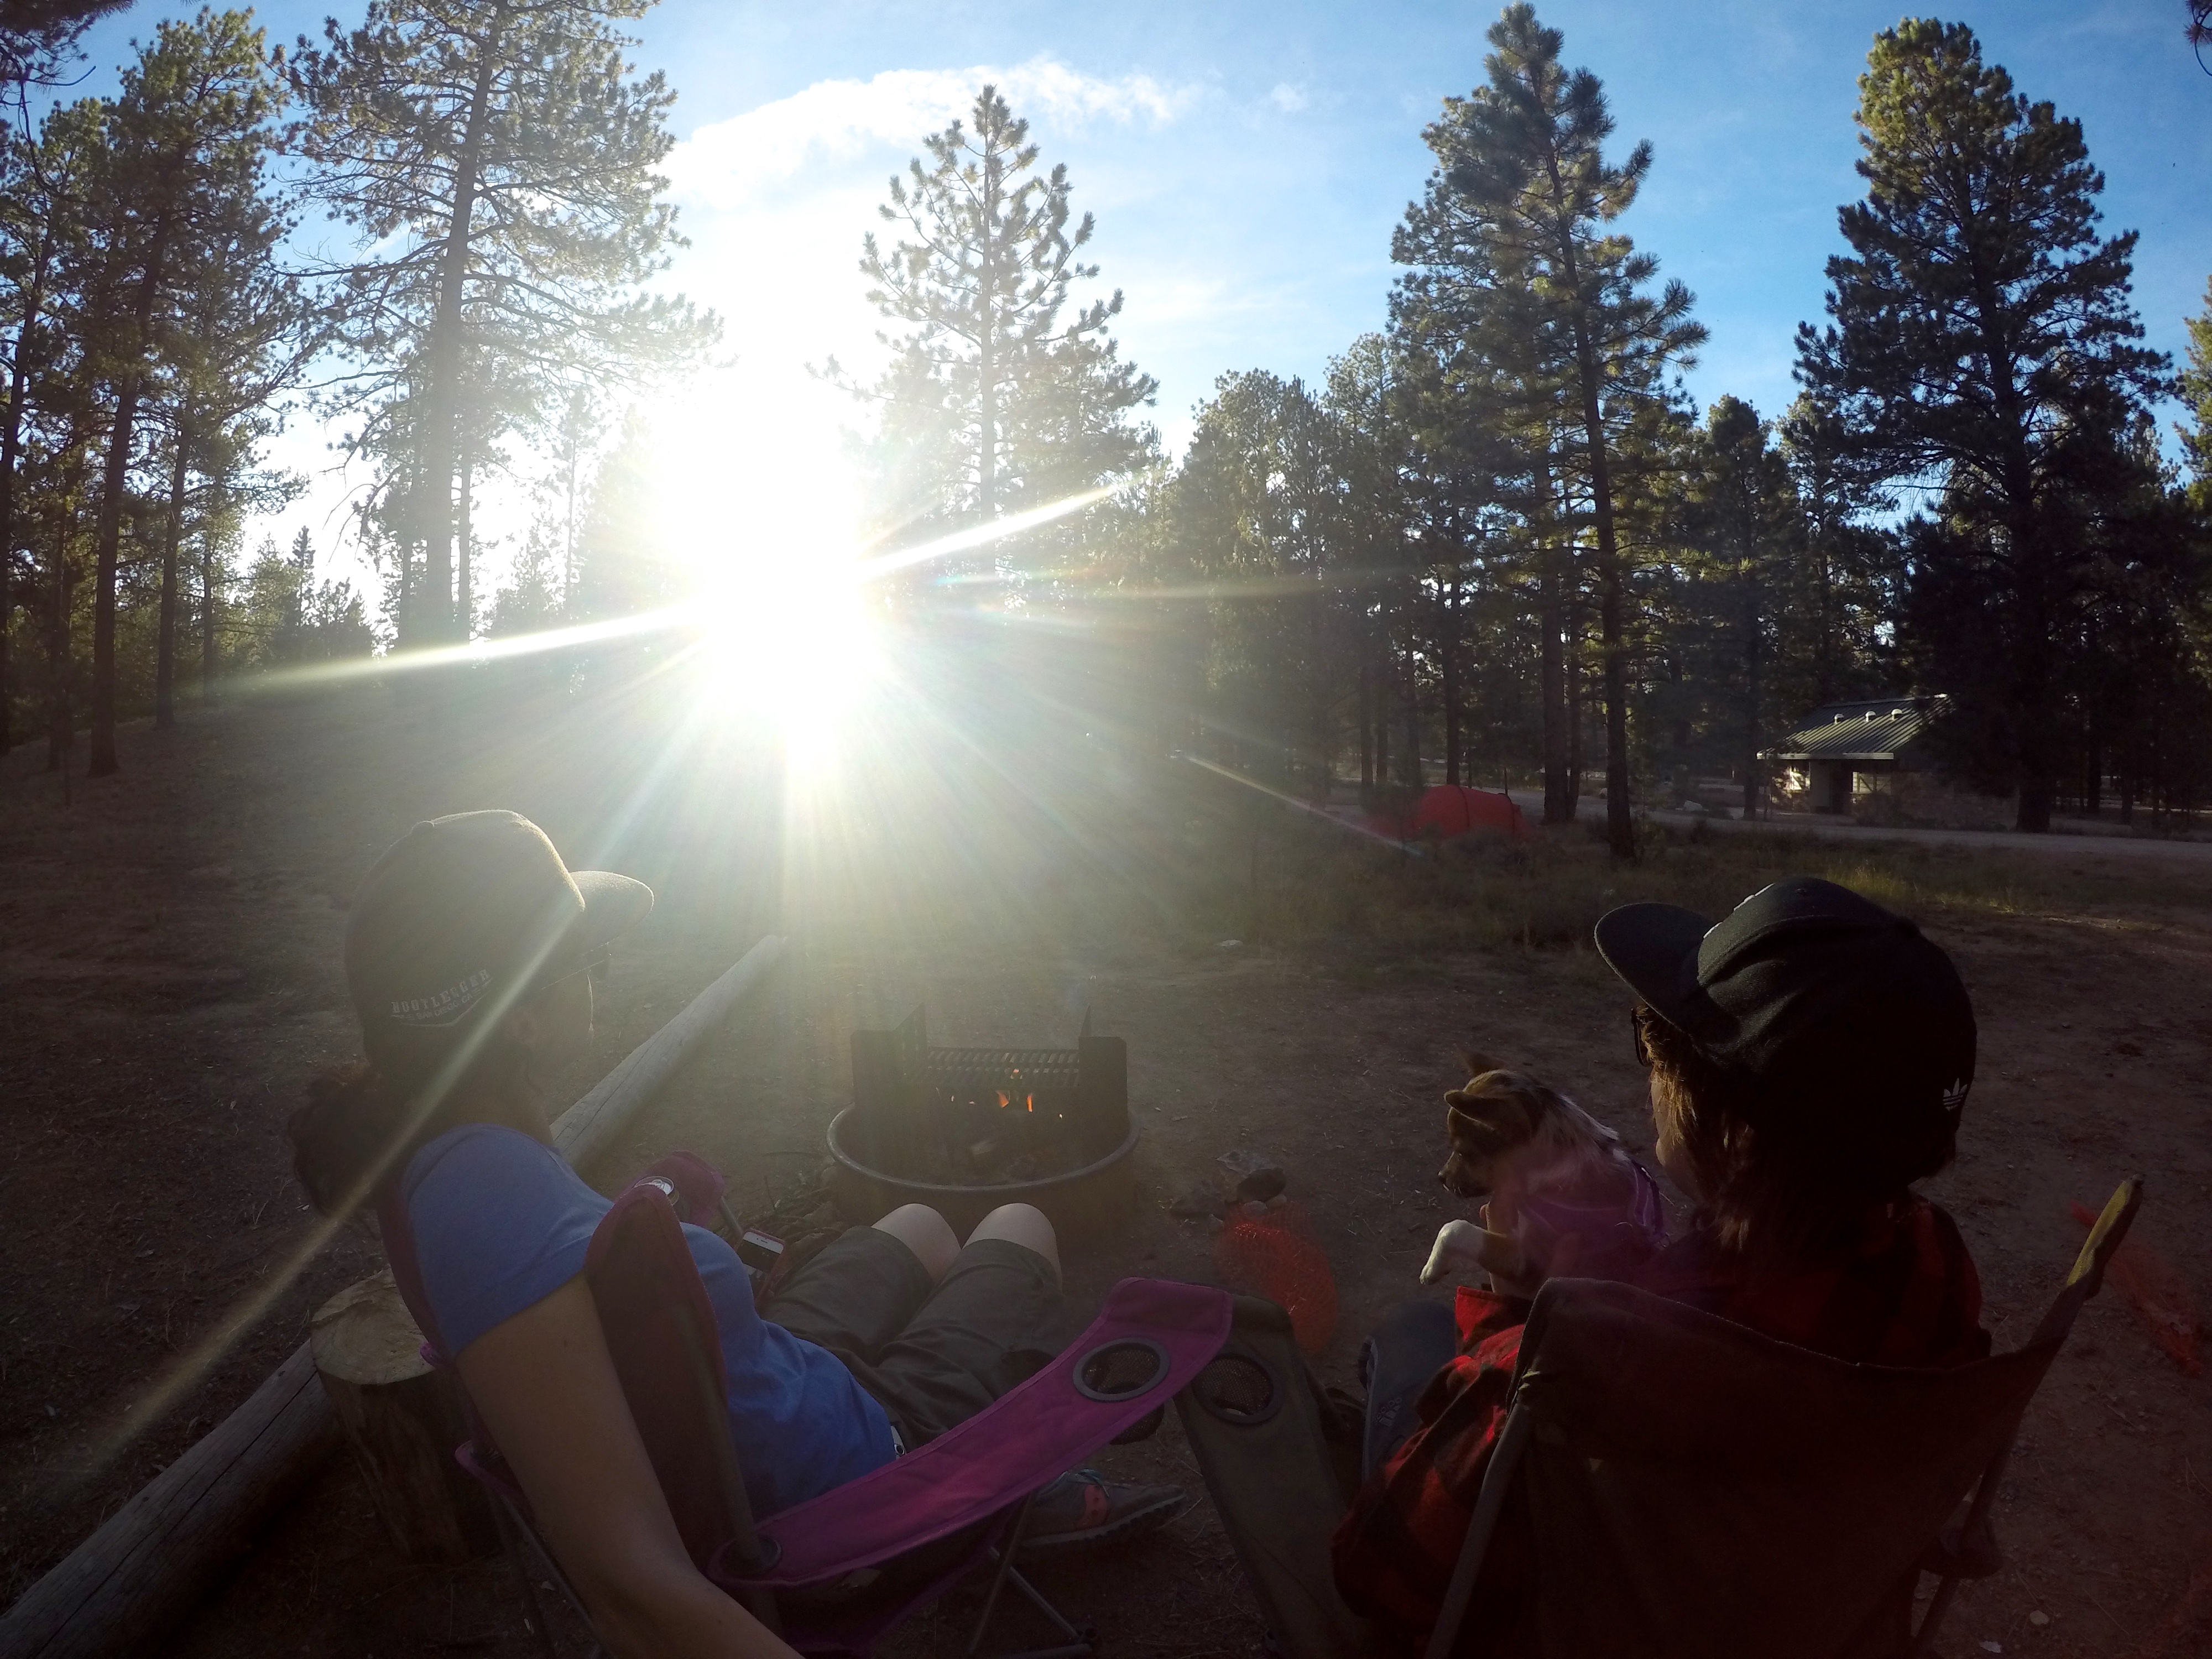 A wide angle photo showing two women and a small dog sitting in camping chairs around a fire at a campsite in the woods.